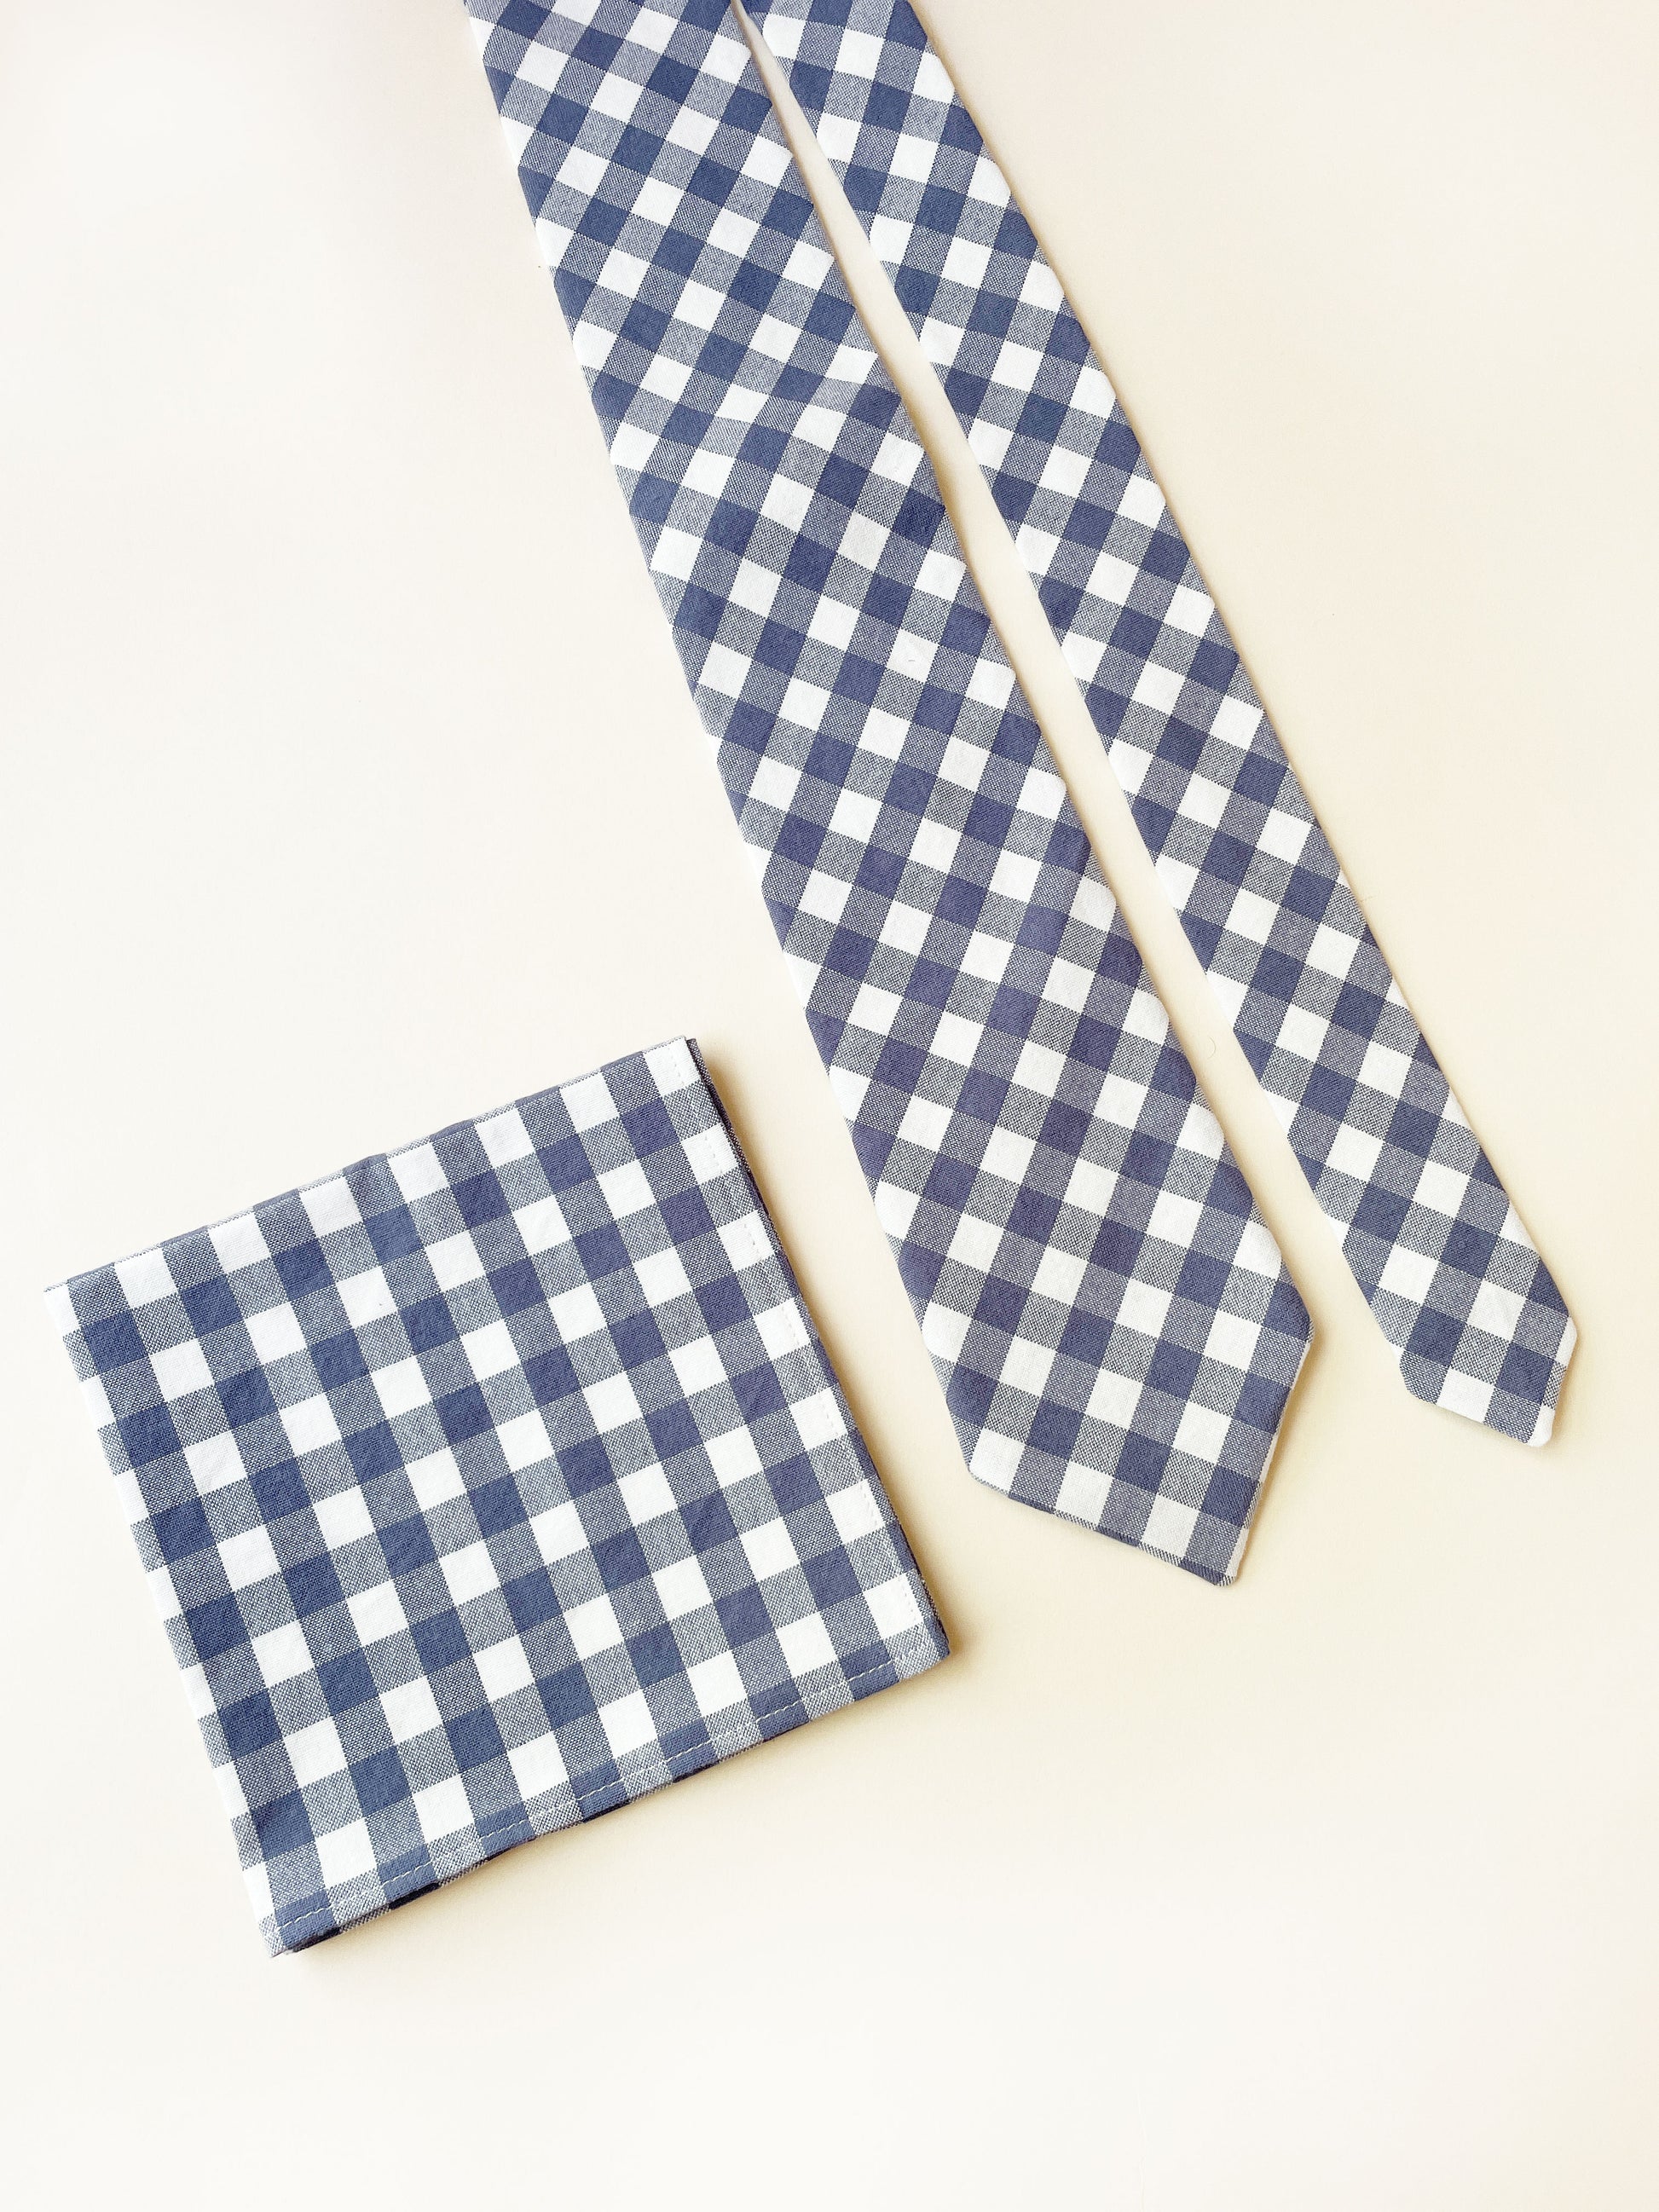 A handmade slate blue gingham plaid pocket square with a matching necktie.